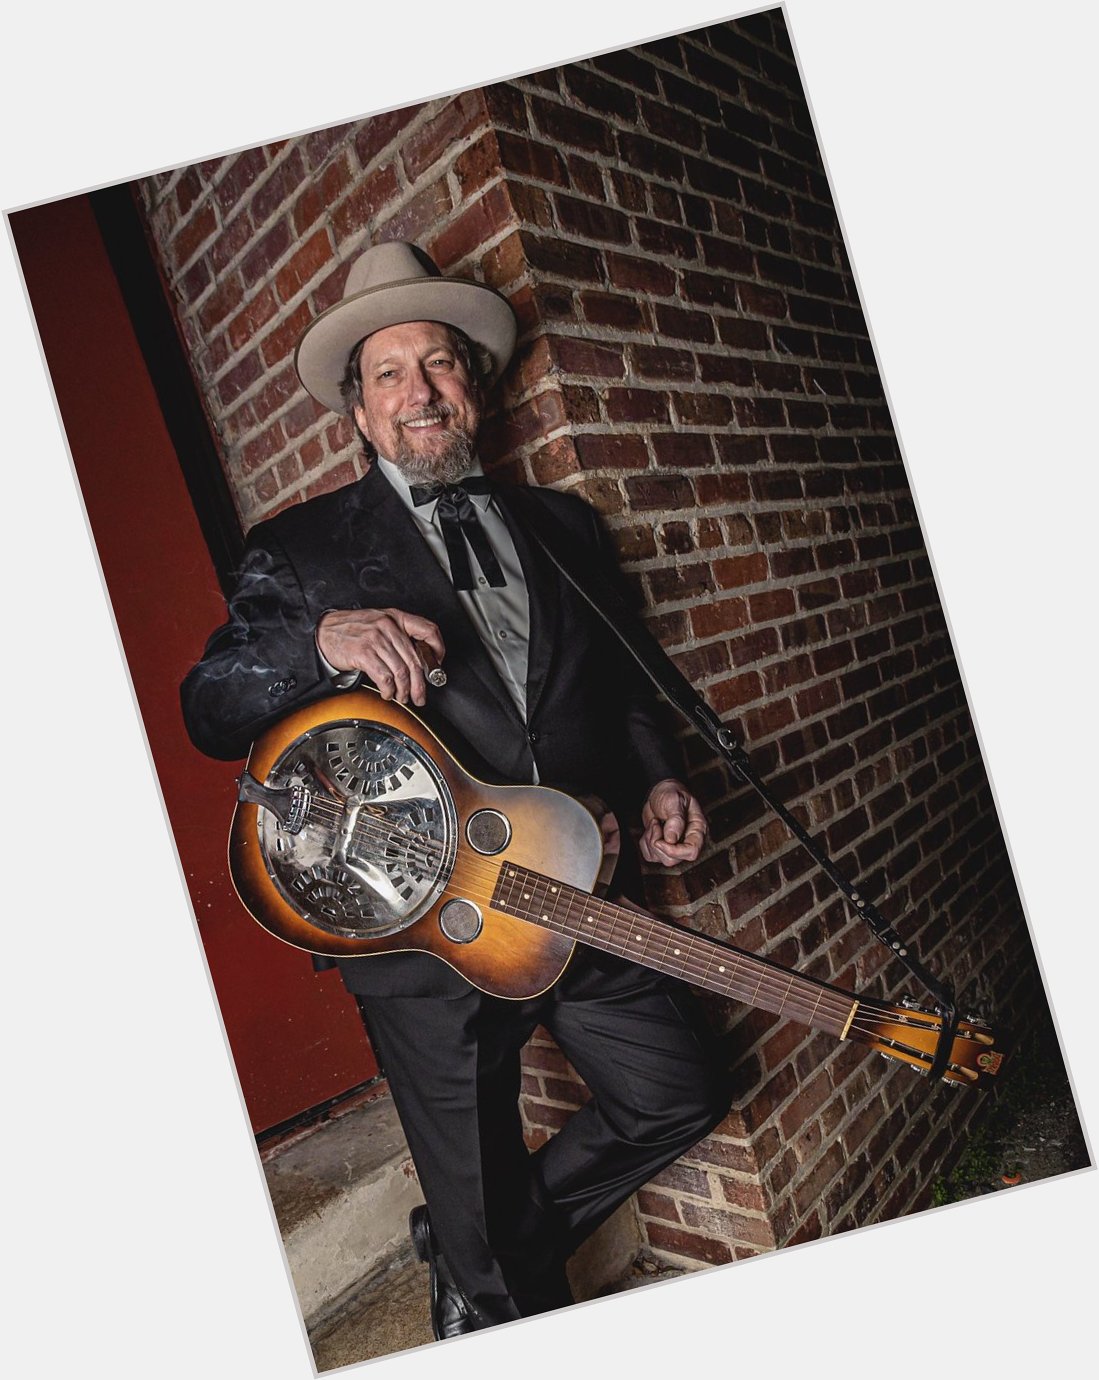 Please join us in wishing Jerry Douglas a very Happy Birthday!!!

--Team JD
Photo by 